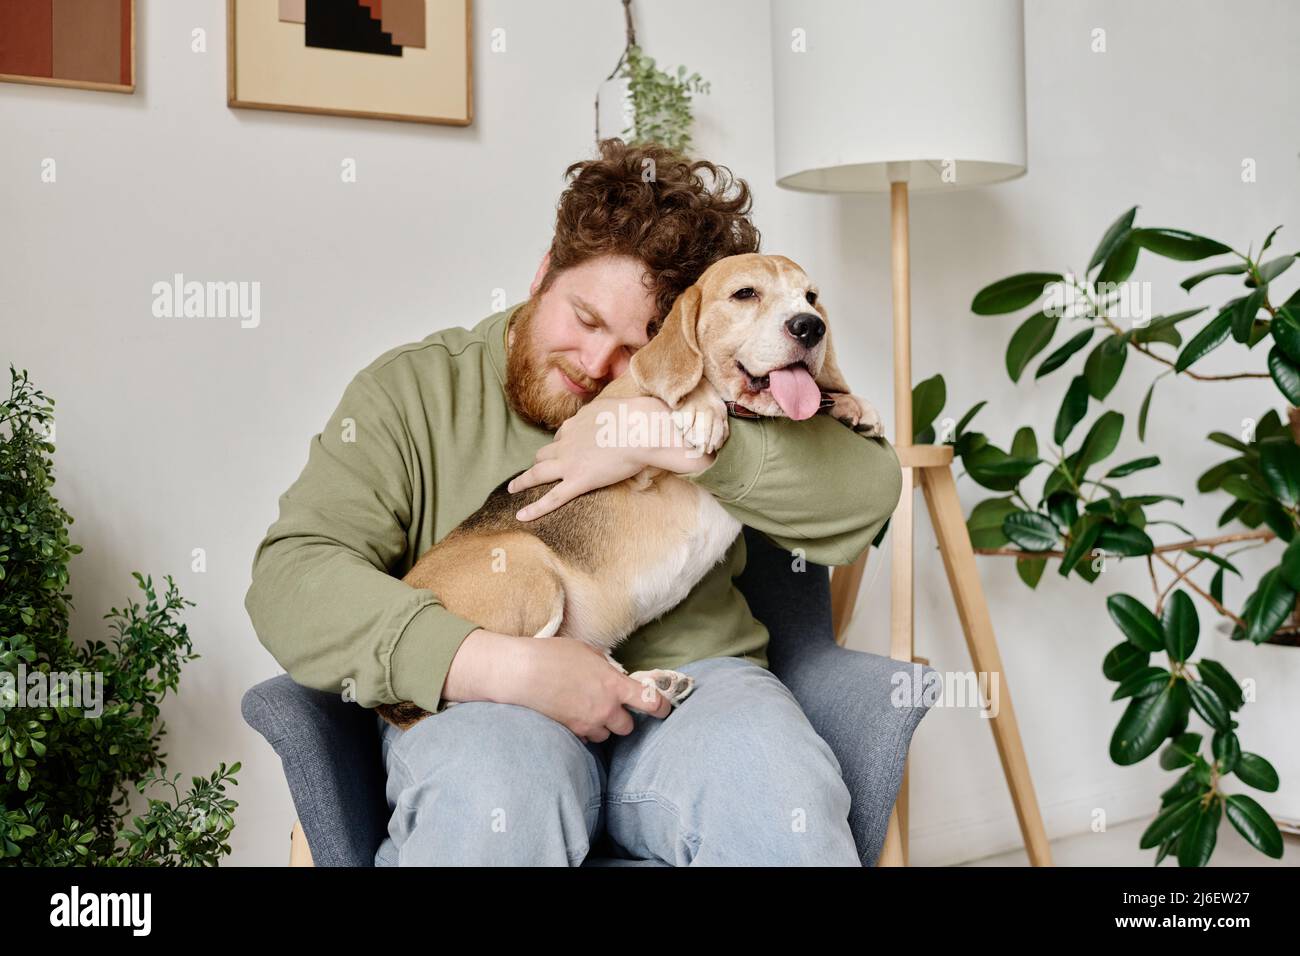 Young bearded man sitting on armchair in room with plants embracing his dog and relaxing Stock Photo